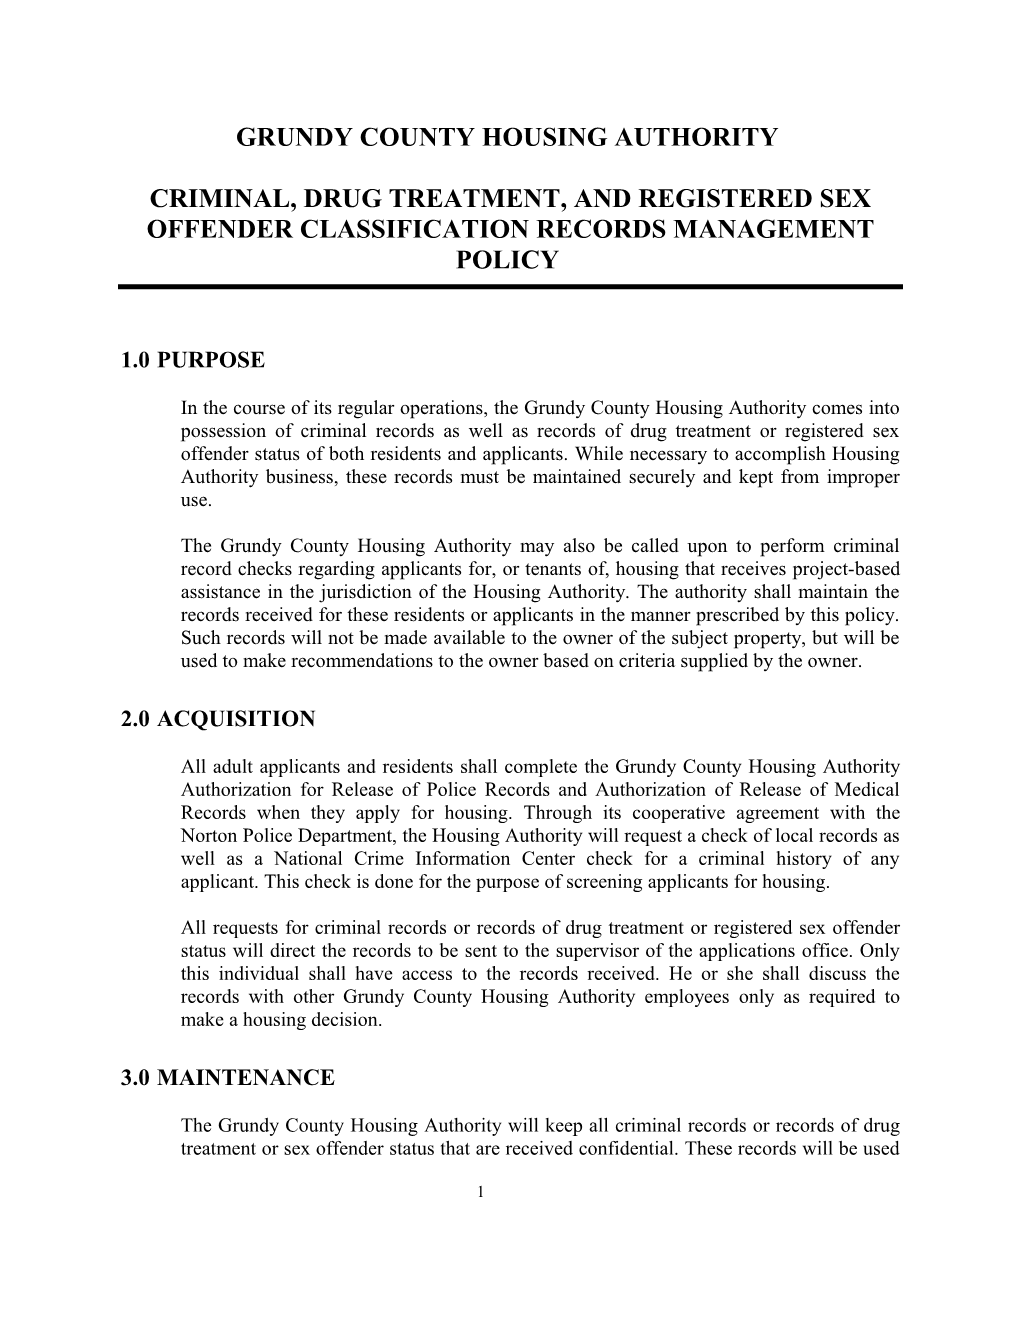 Criminal, Drug Treatment, and Registered Sex Offender Classification Records Management Policy